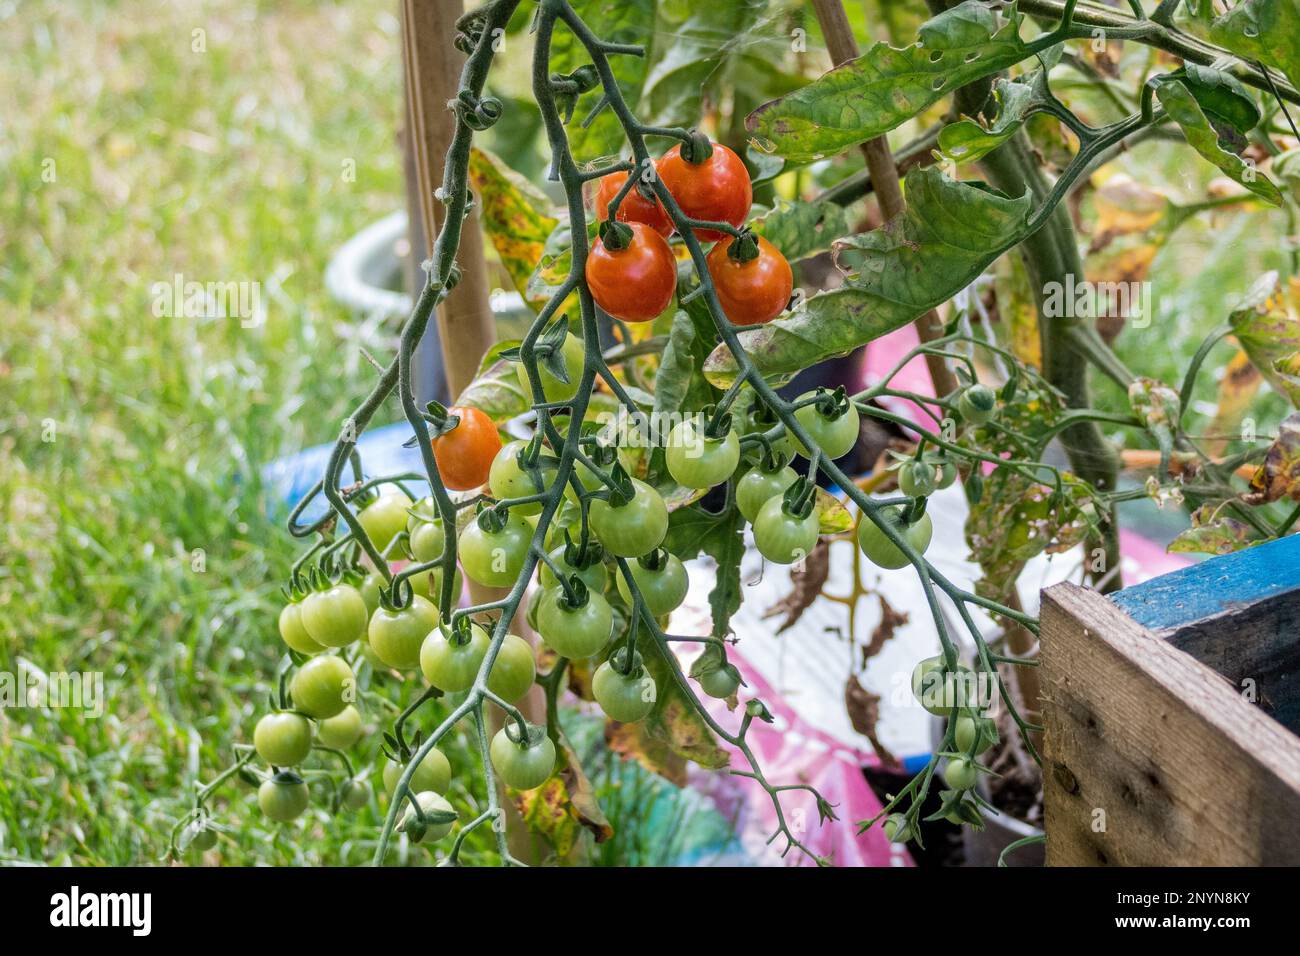 A truss of cherry tomatoes with both ripe and unripe fruits on a tomato vine growing in a growbag outside Stock Photo